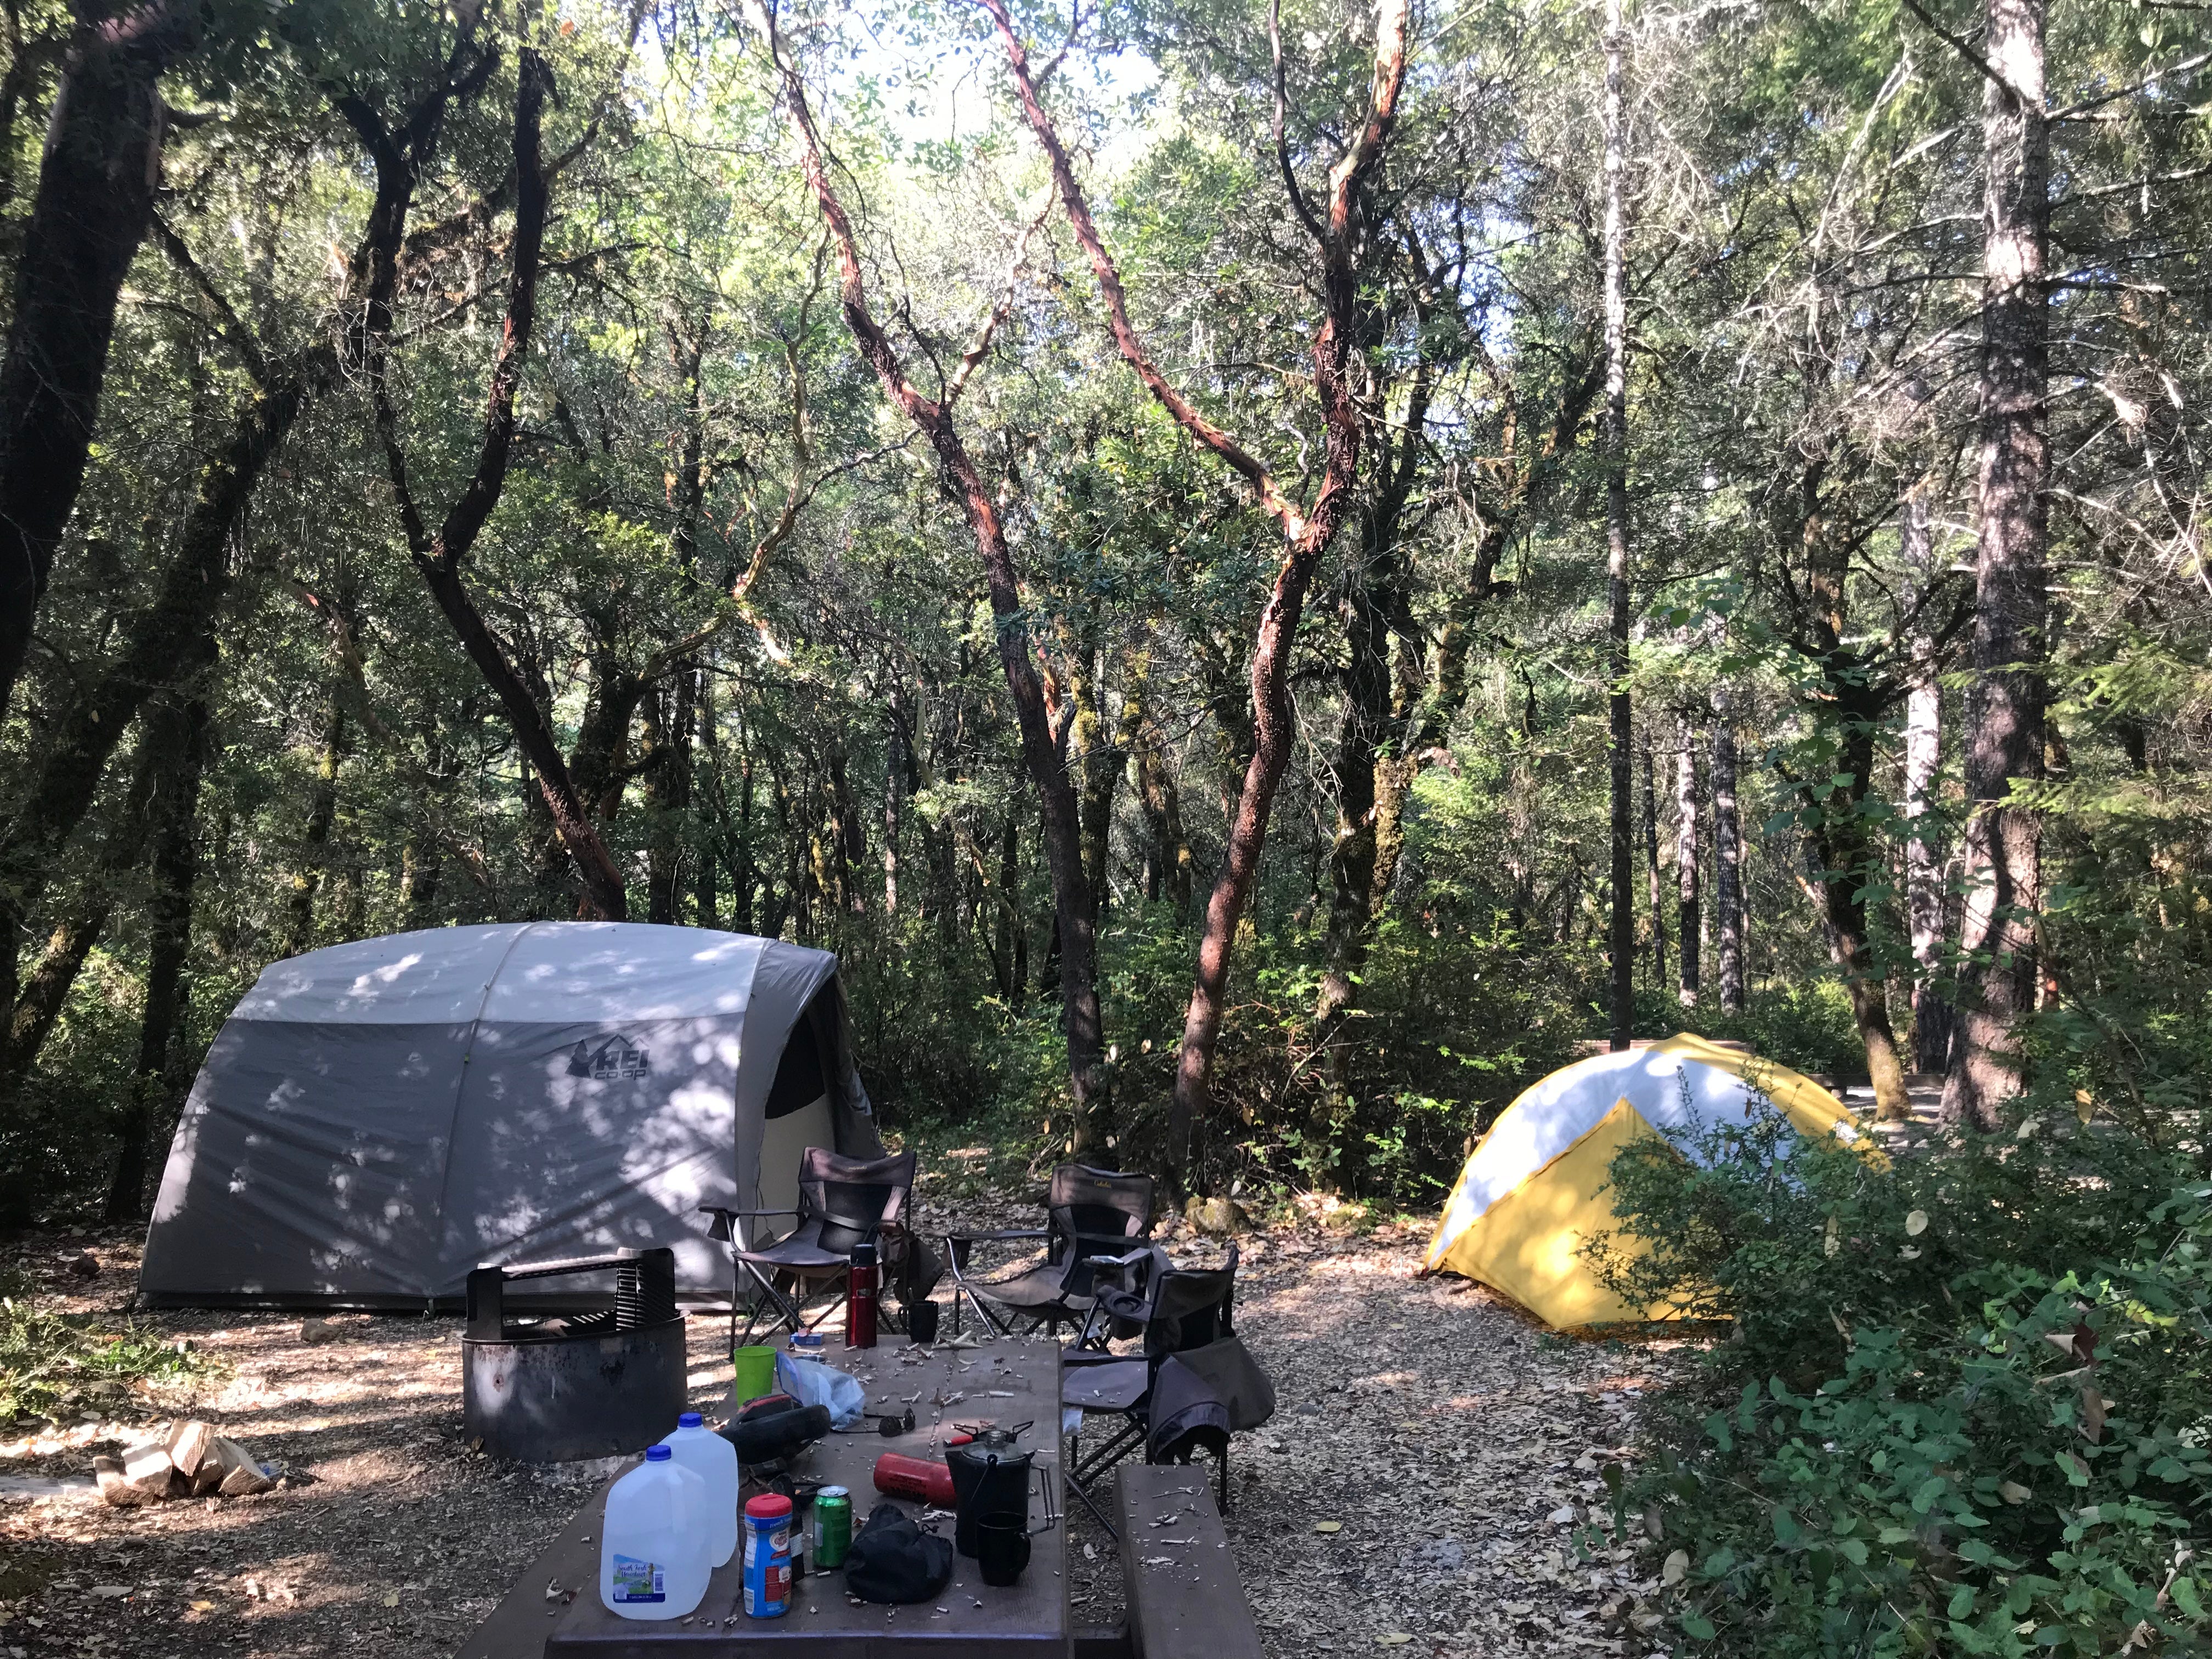 Camper submitted image from Grassy Flat Campground - 4